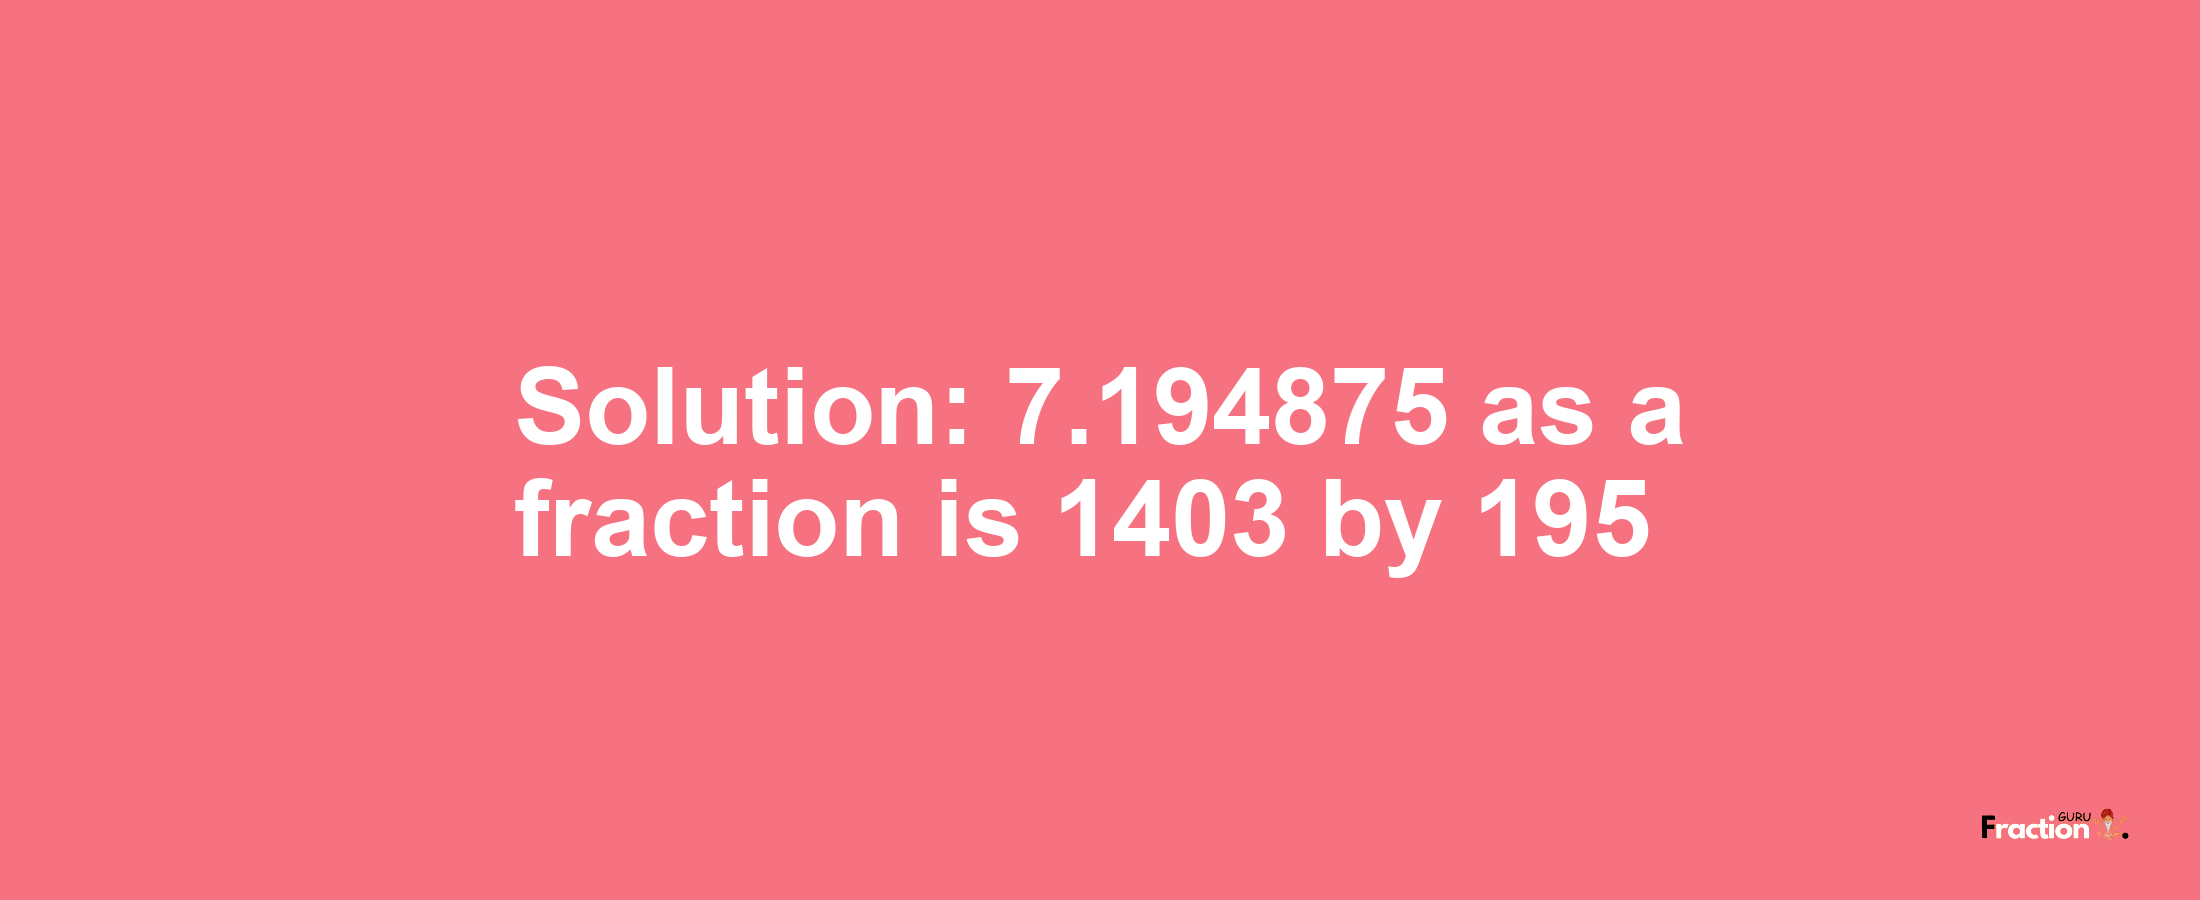 Solution:7.194875 as a fraction is 1403/195